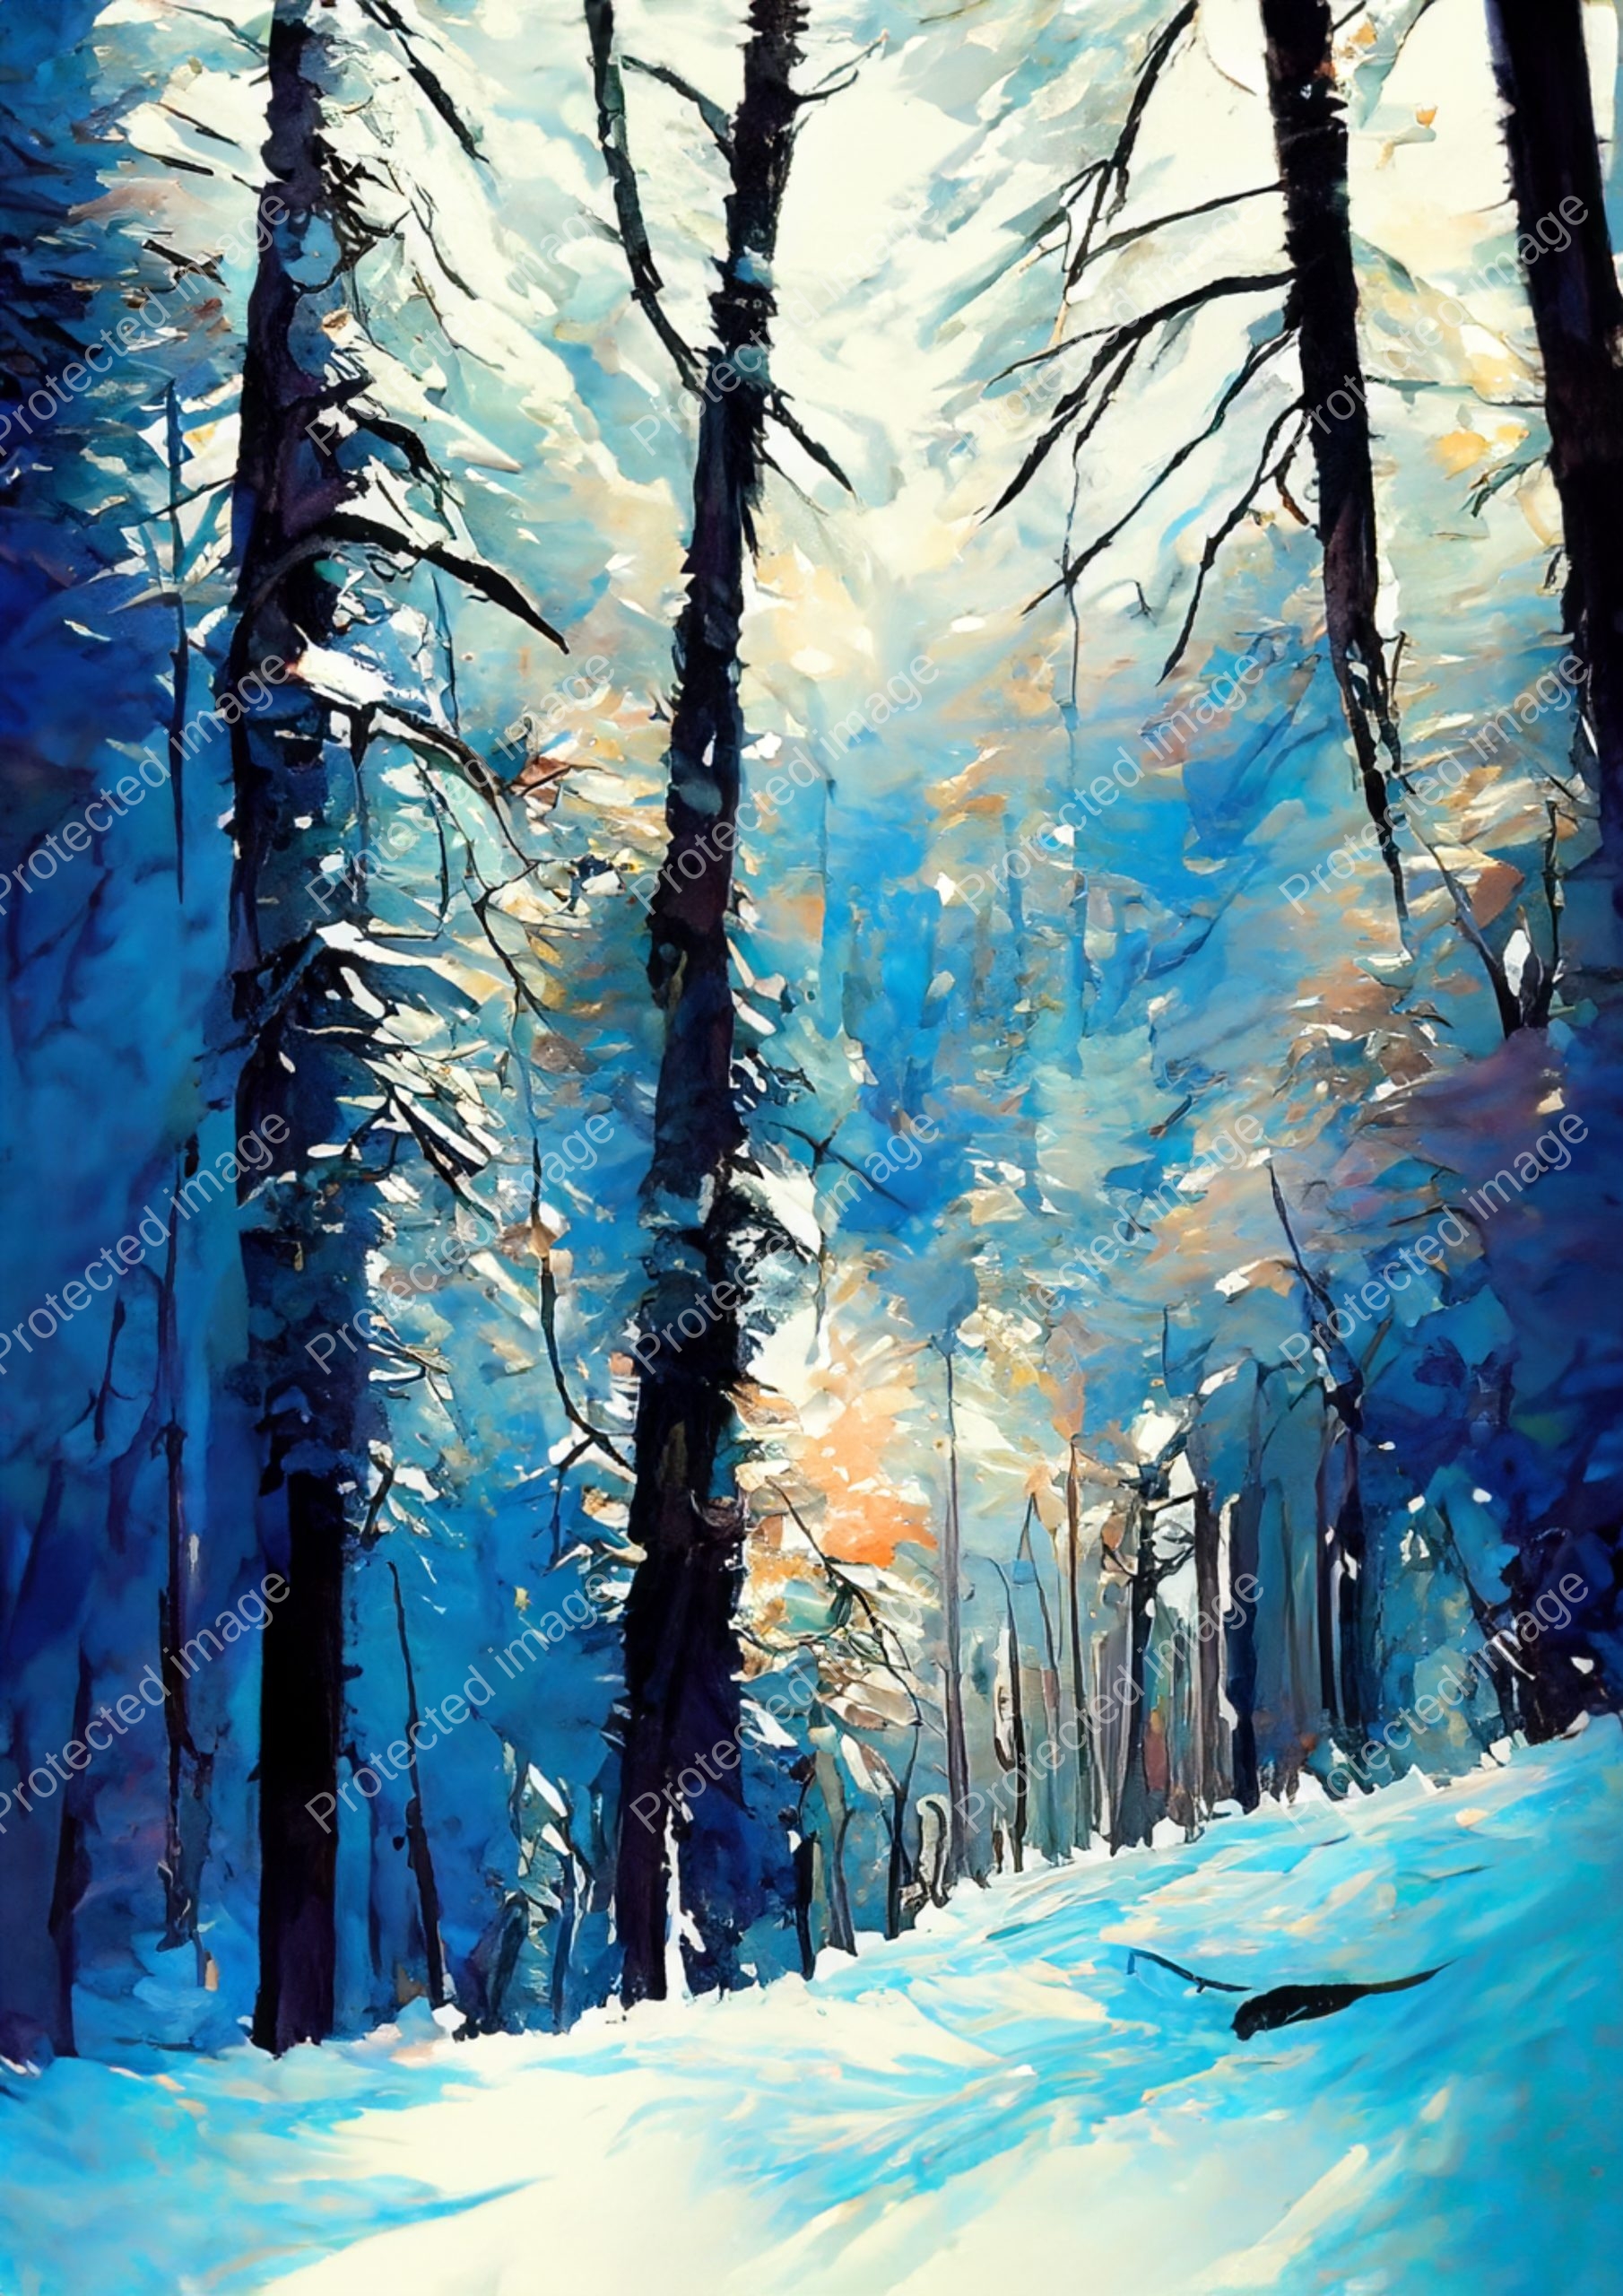 Blue winter woods painting